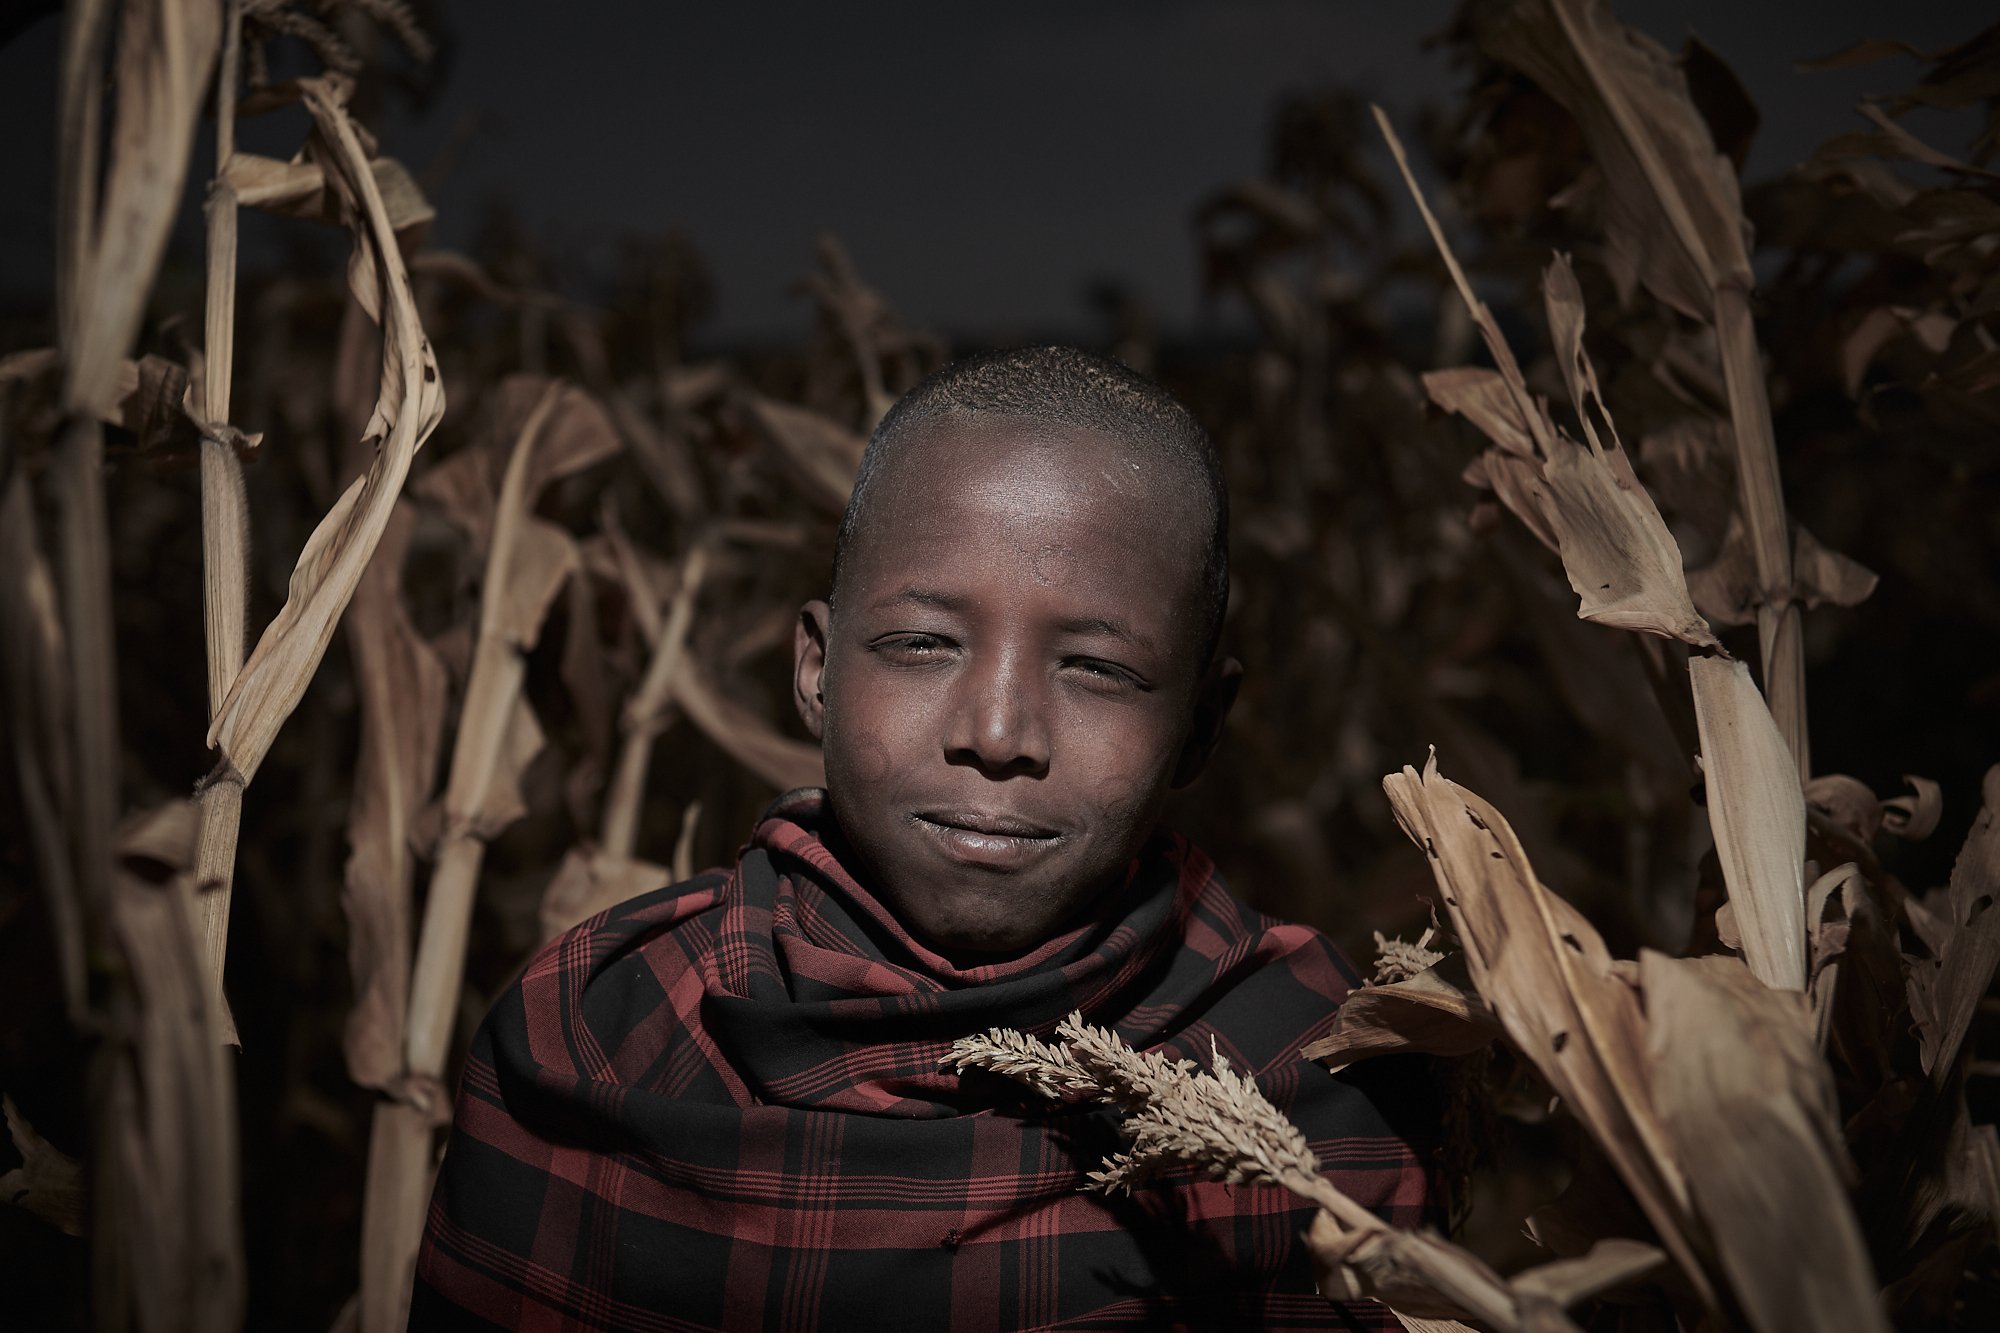 While essentially pastoralists, the Maasai have come to slowly adopt crops and one of the main ones is corn, usually grown in small patches